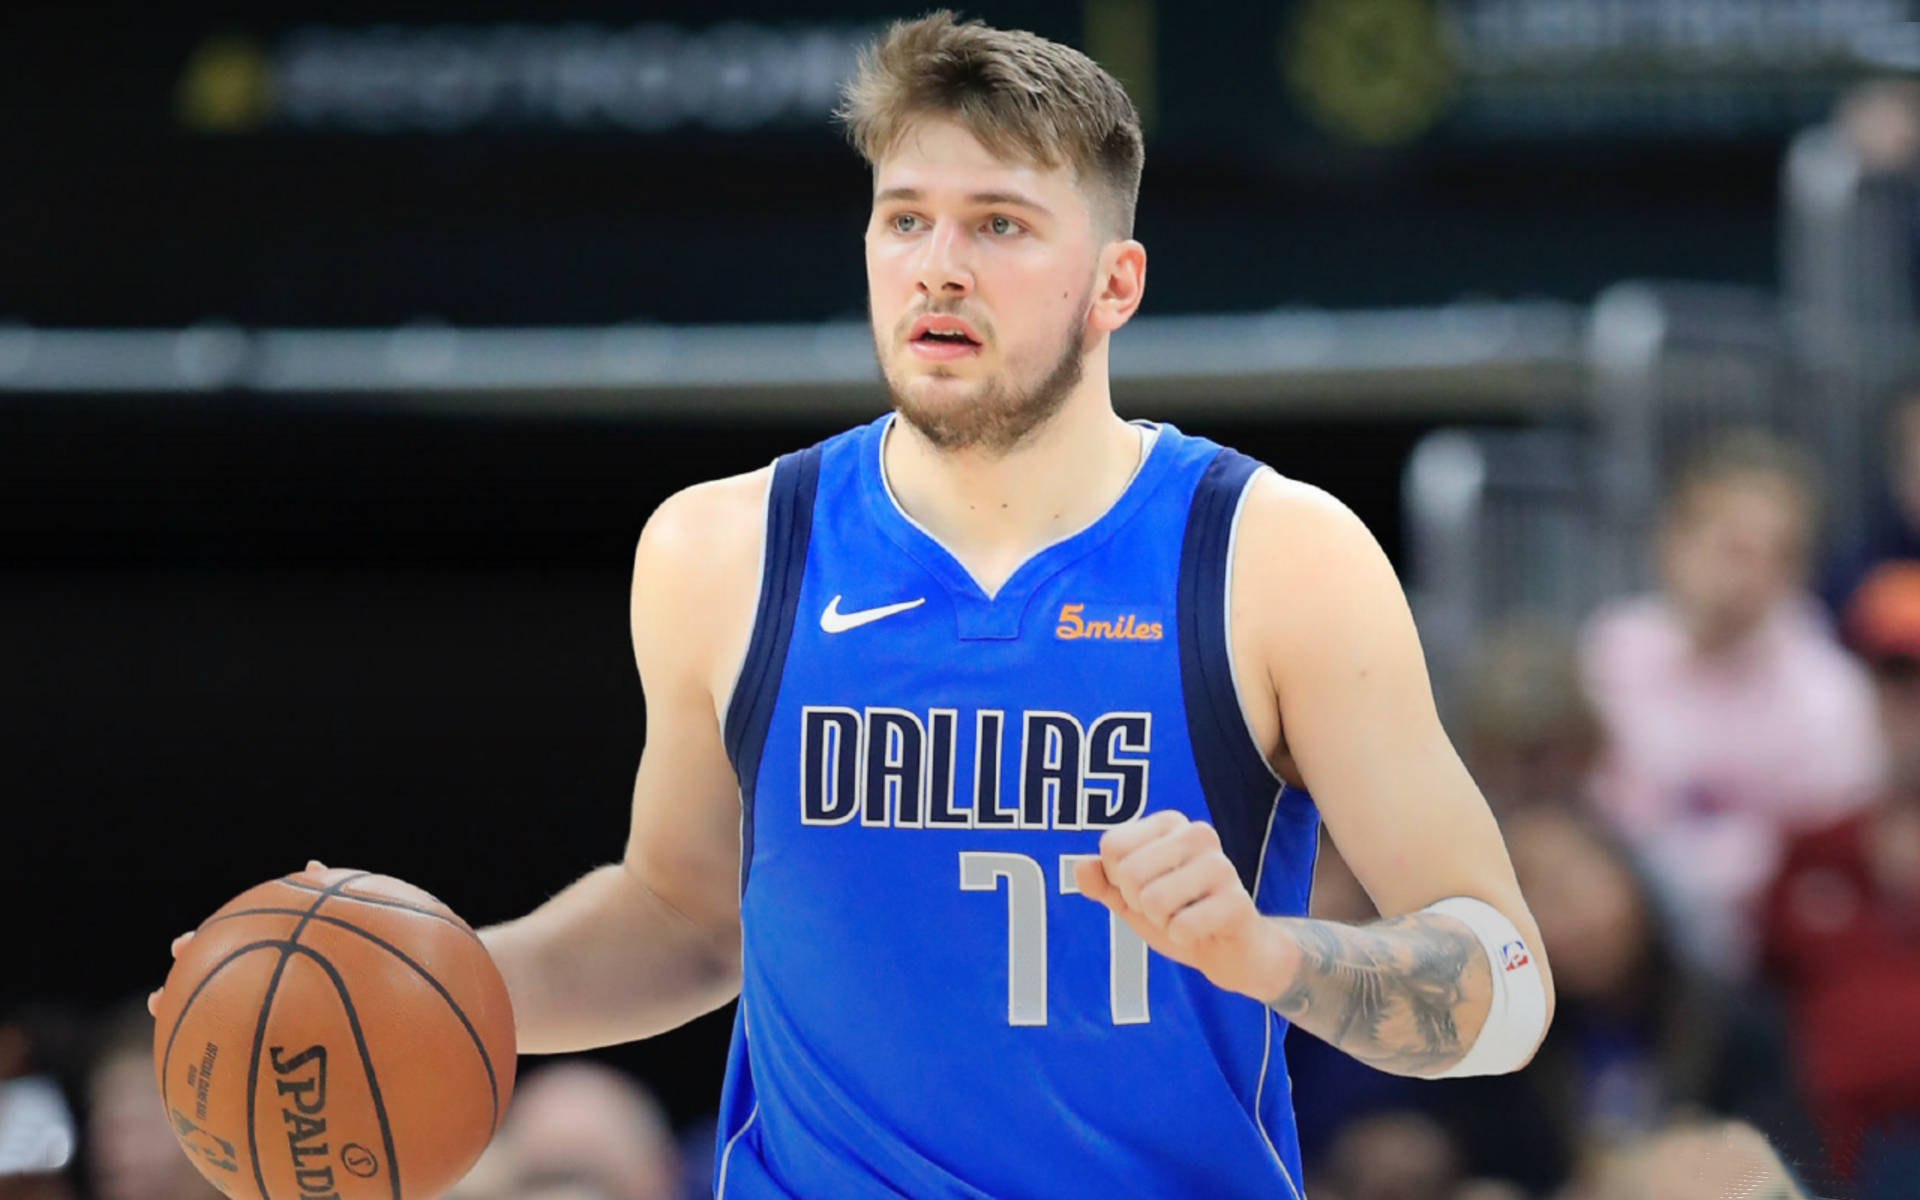 Download Luka Dončić wallpapers for mobile phone free Luka Dončić HD  pictures